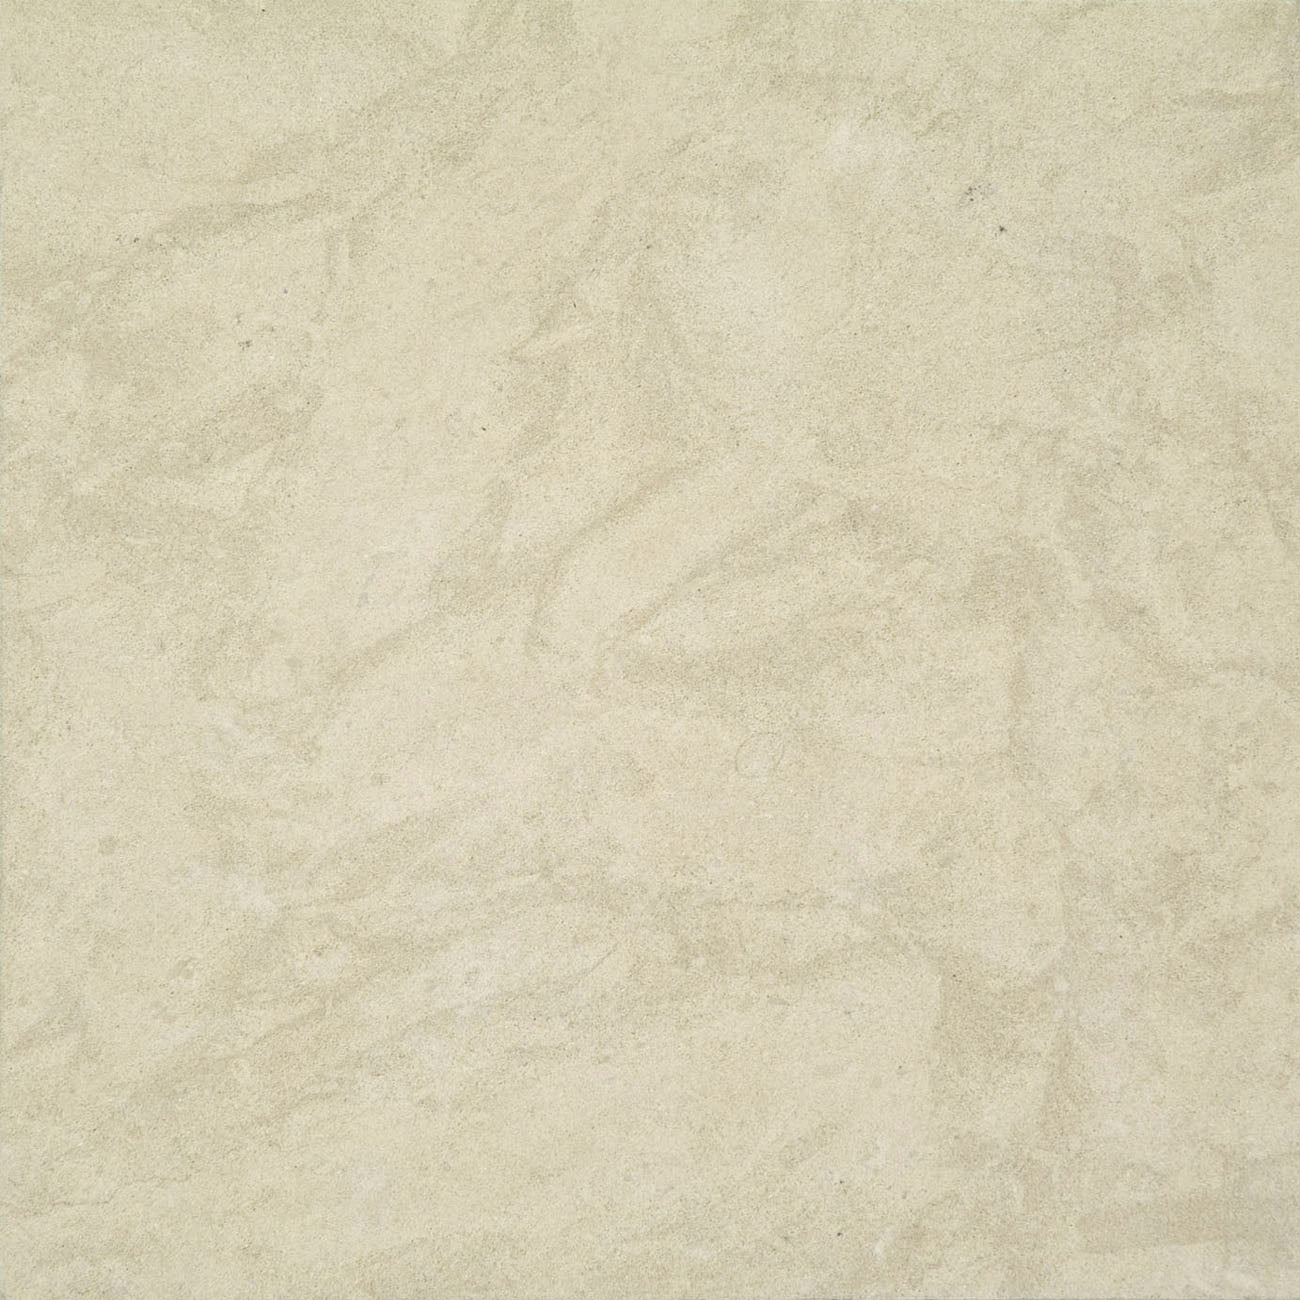 bateig beige limestone beige stone tile  sold by surface group